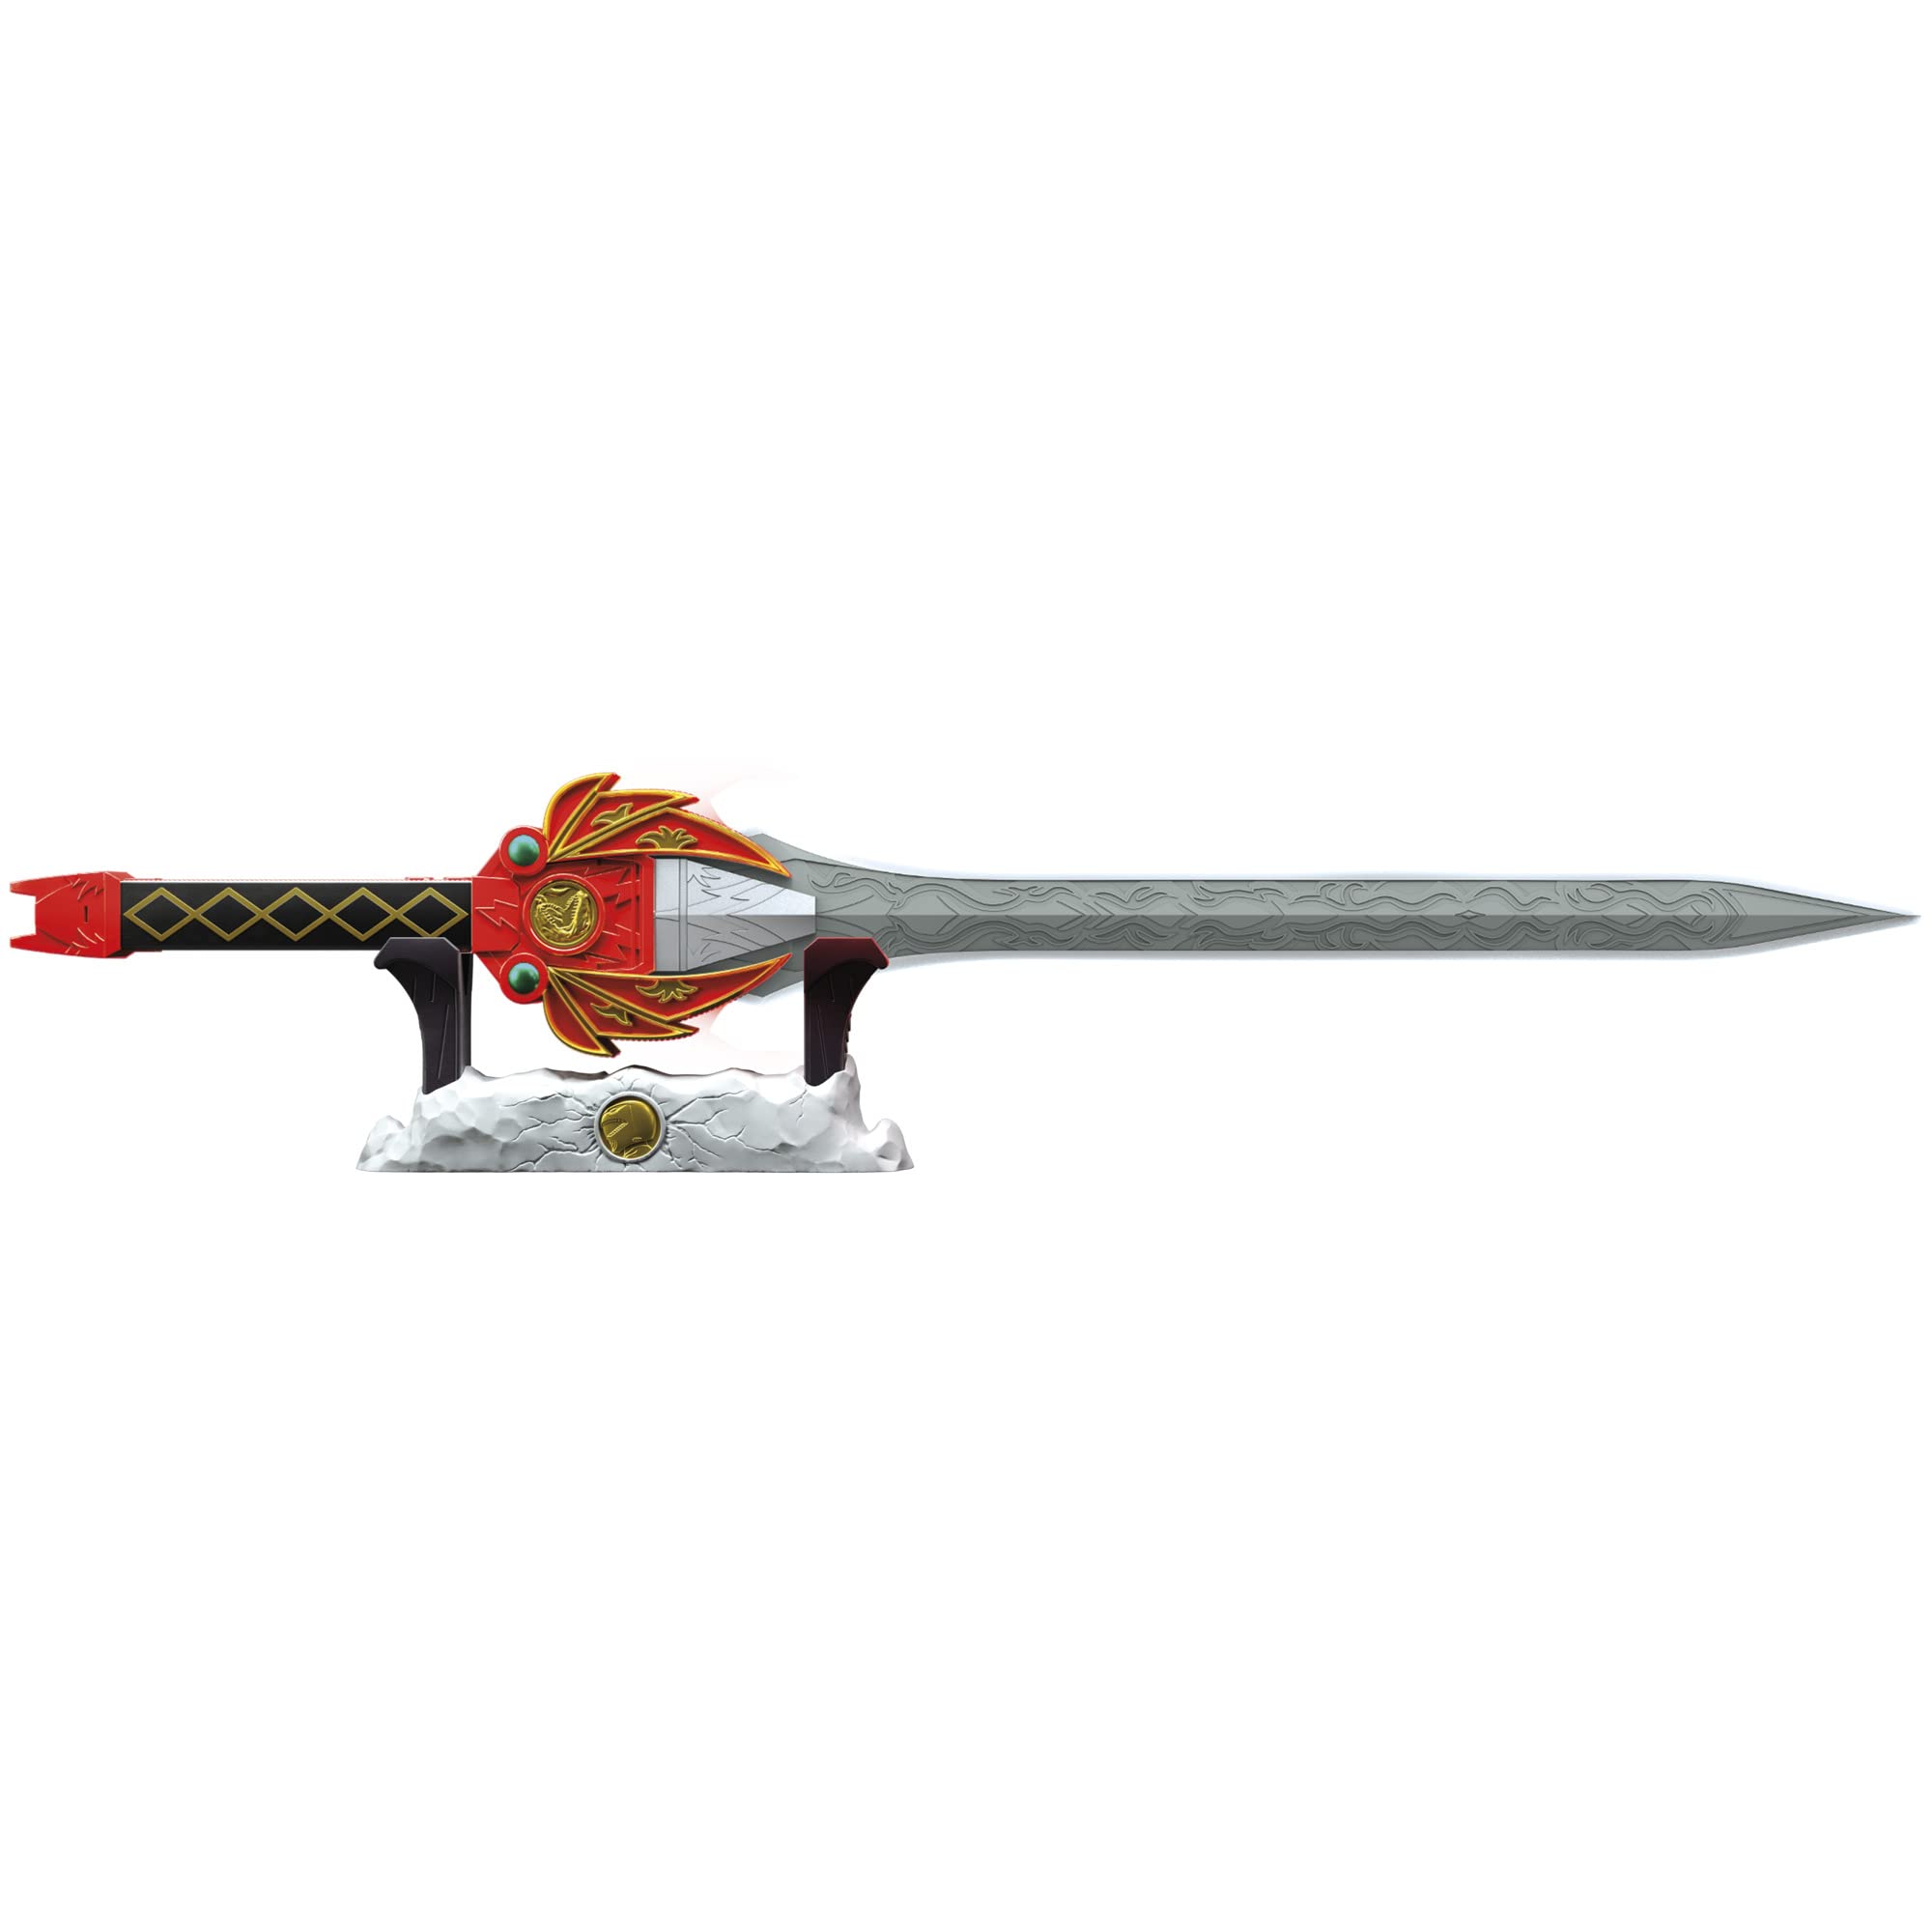 Power Rangers Lightning Collection Mighty Morphin Red Ranger Power Sword $99 + Free Shipping